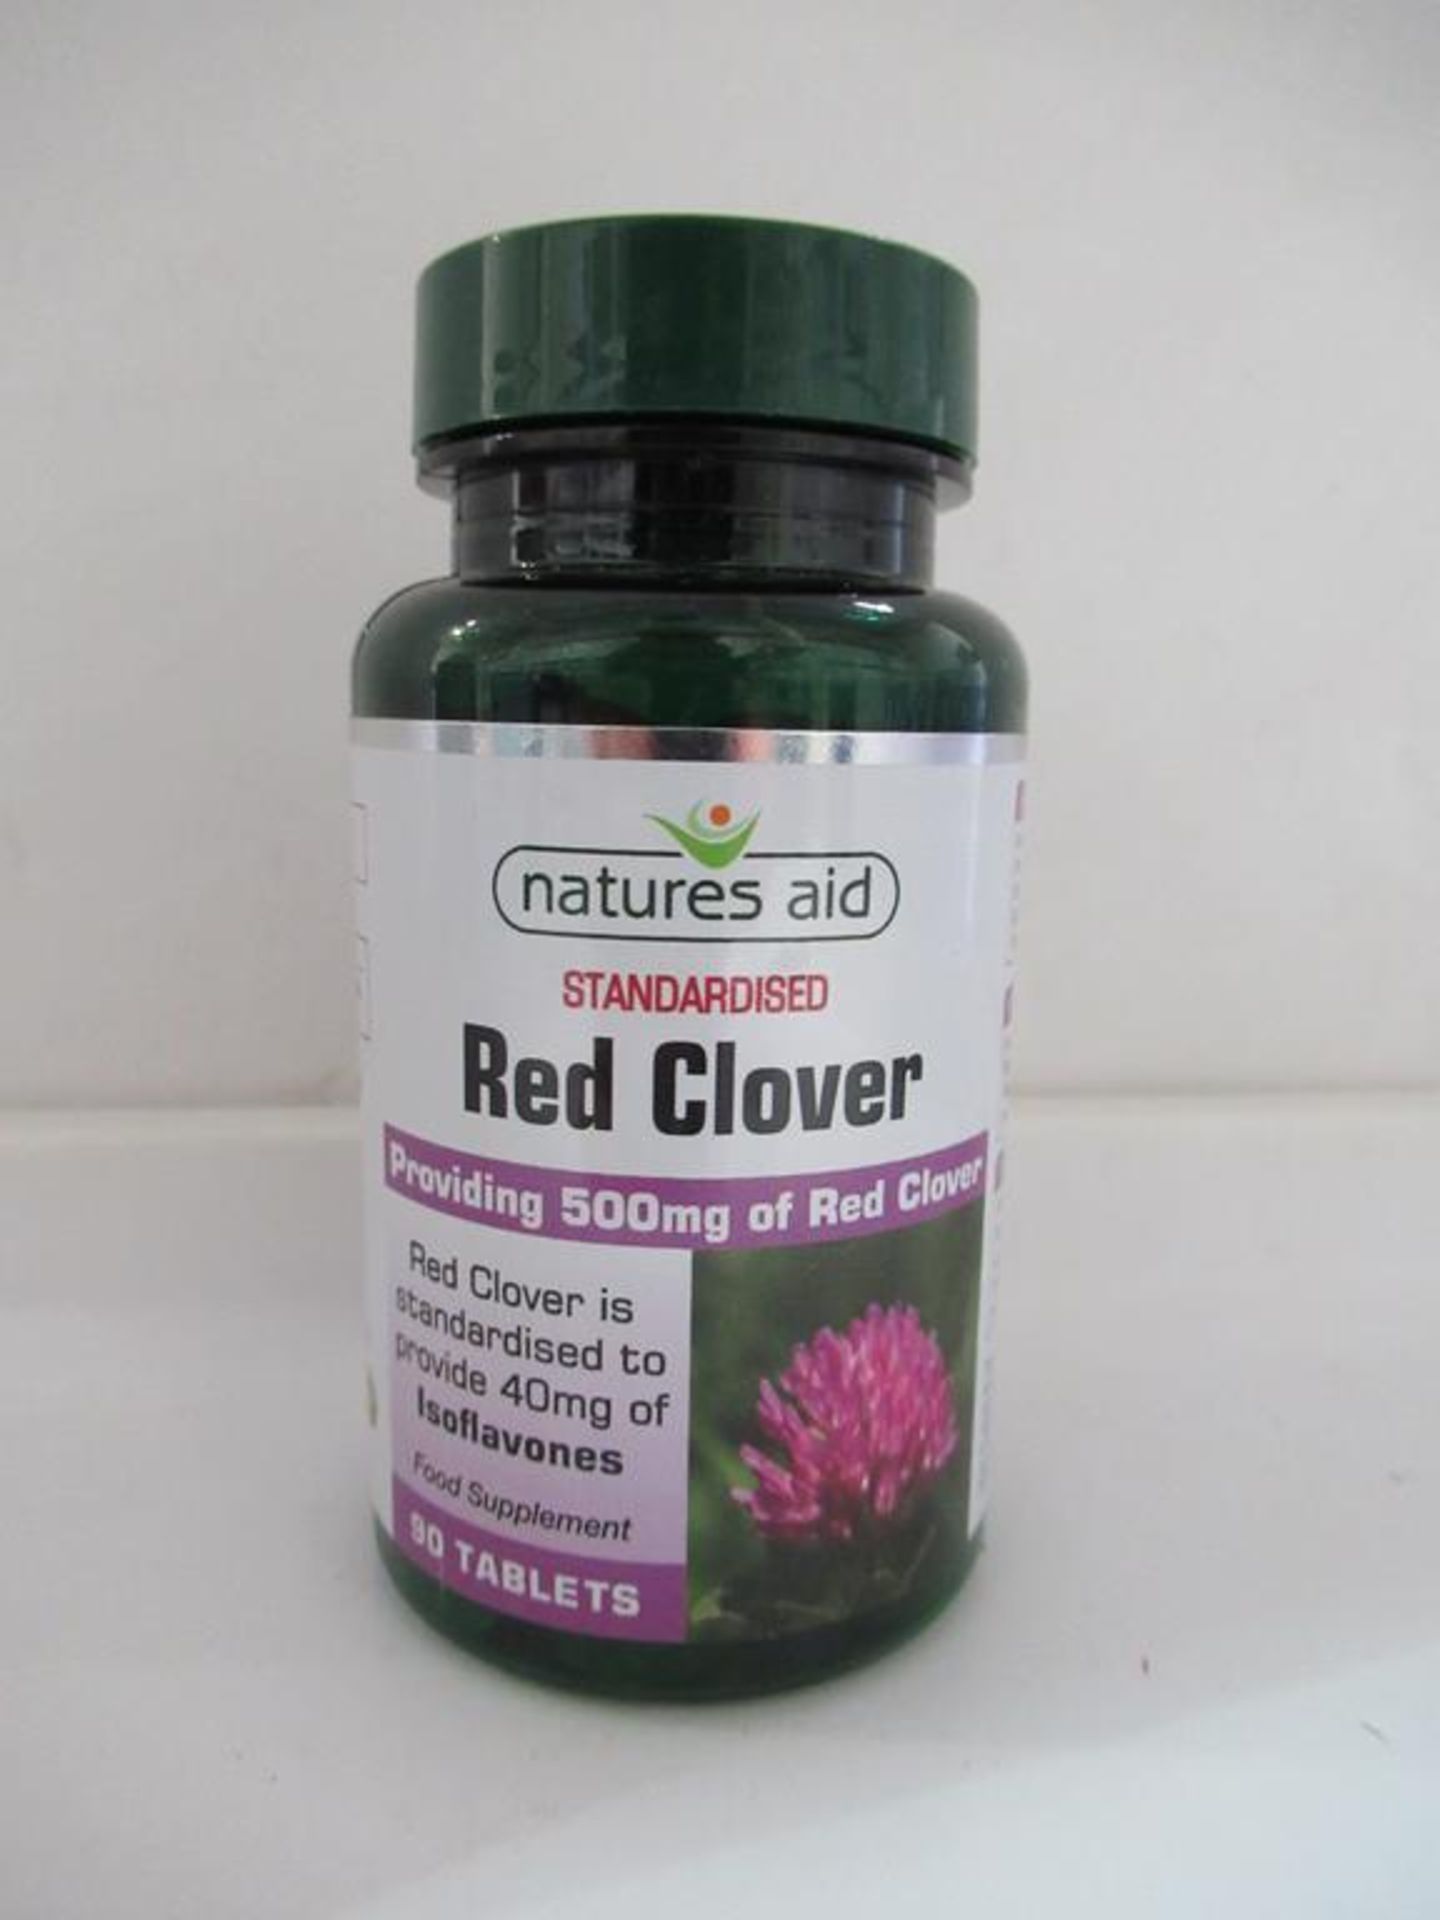 12 Natures Aid supplements to include Fish Oil, Quercetin Formula, Red Clover, Concentrated Garlic, - Image 7 of 7